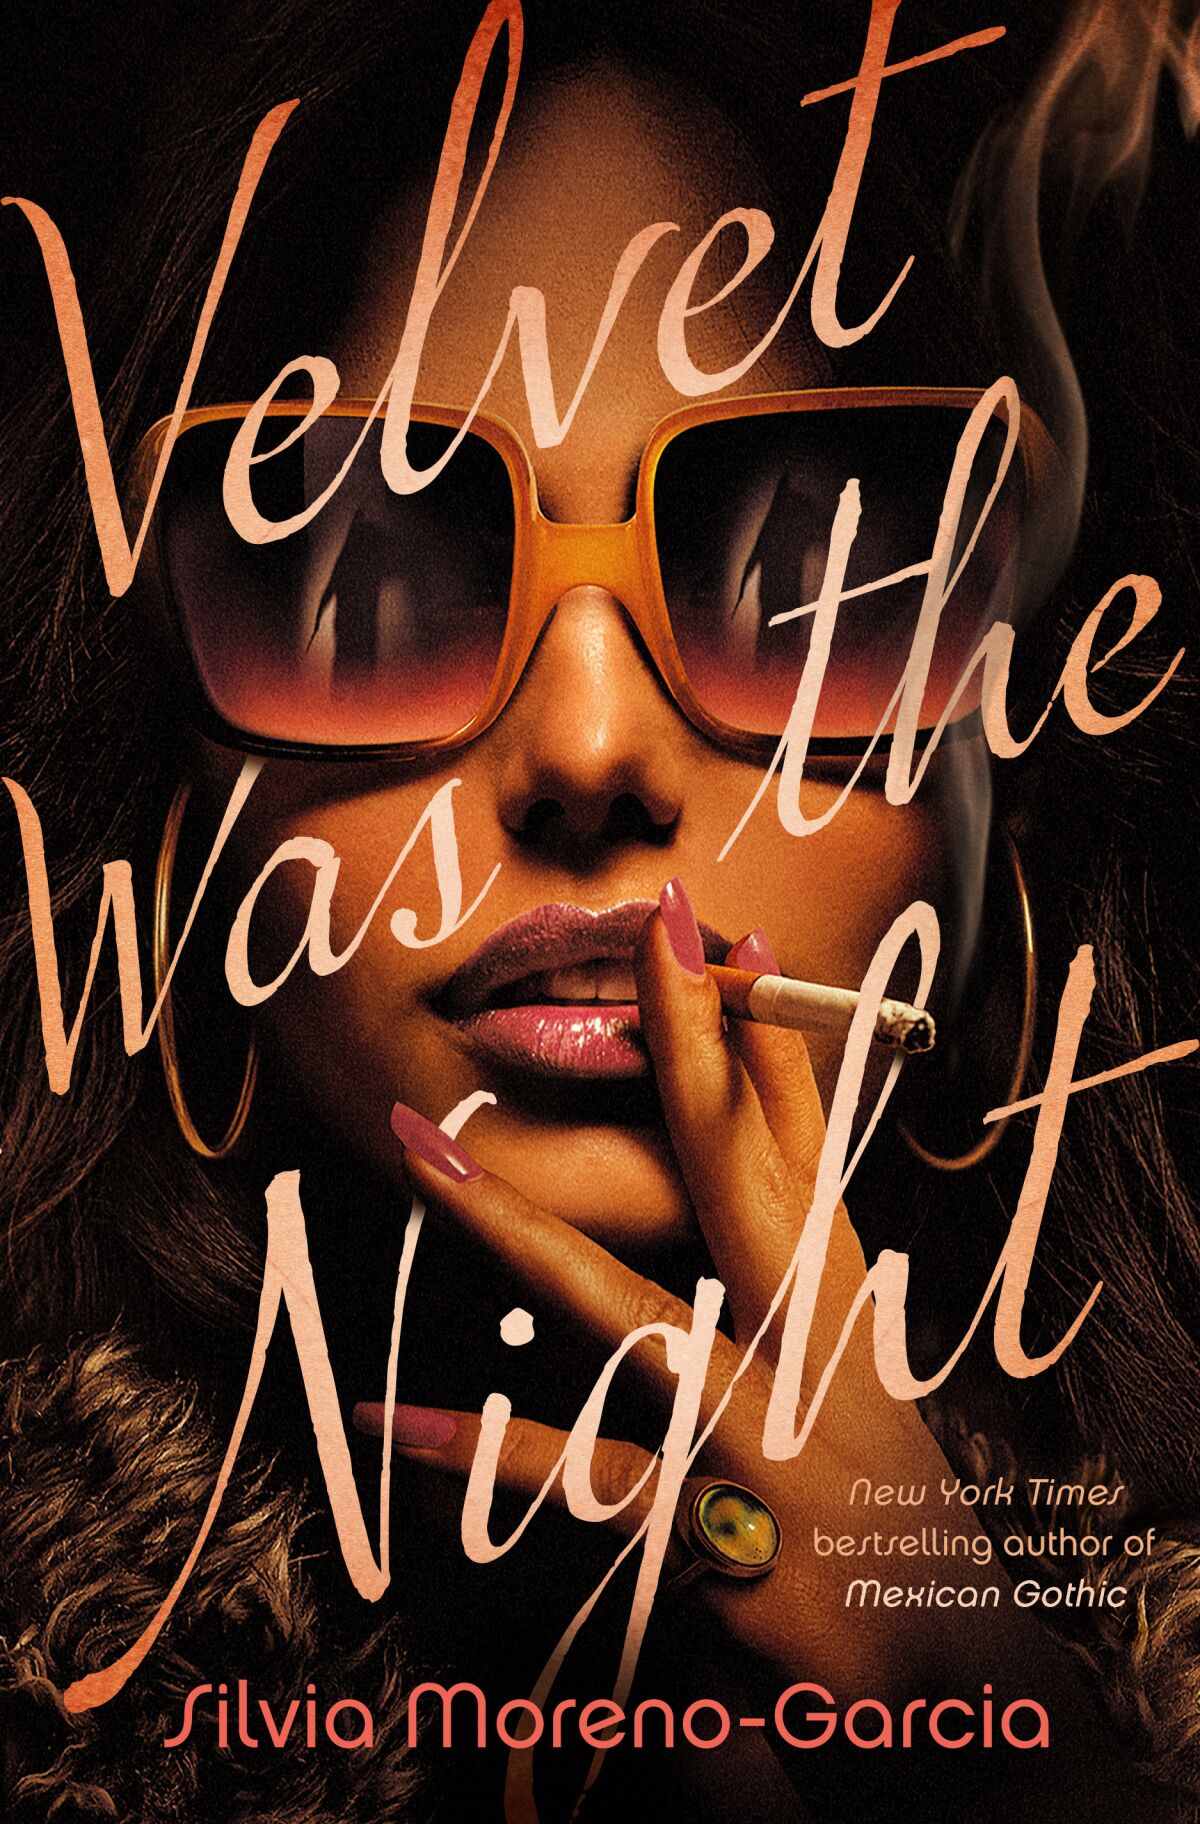 A woman smoking and wearing sunglasses on the cover of the book "Velvet Was the Night" by Silvia Moreno-Garcia